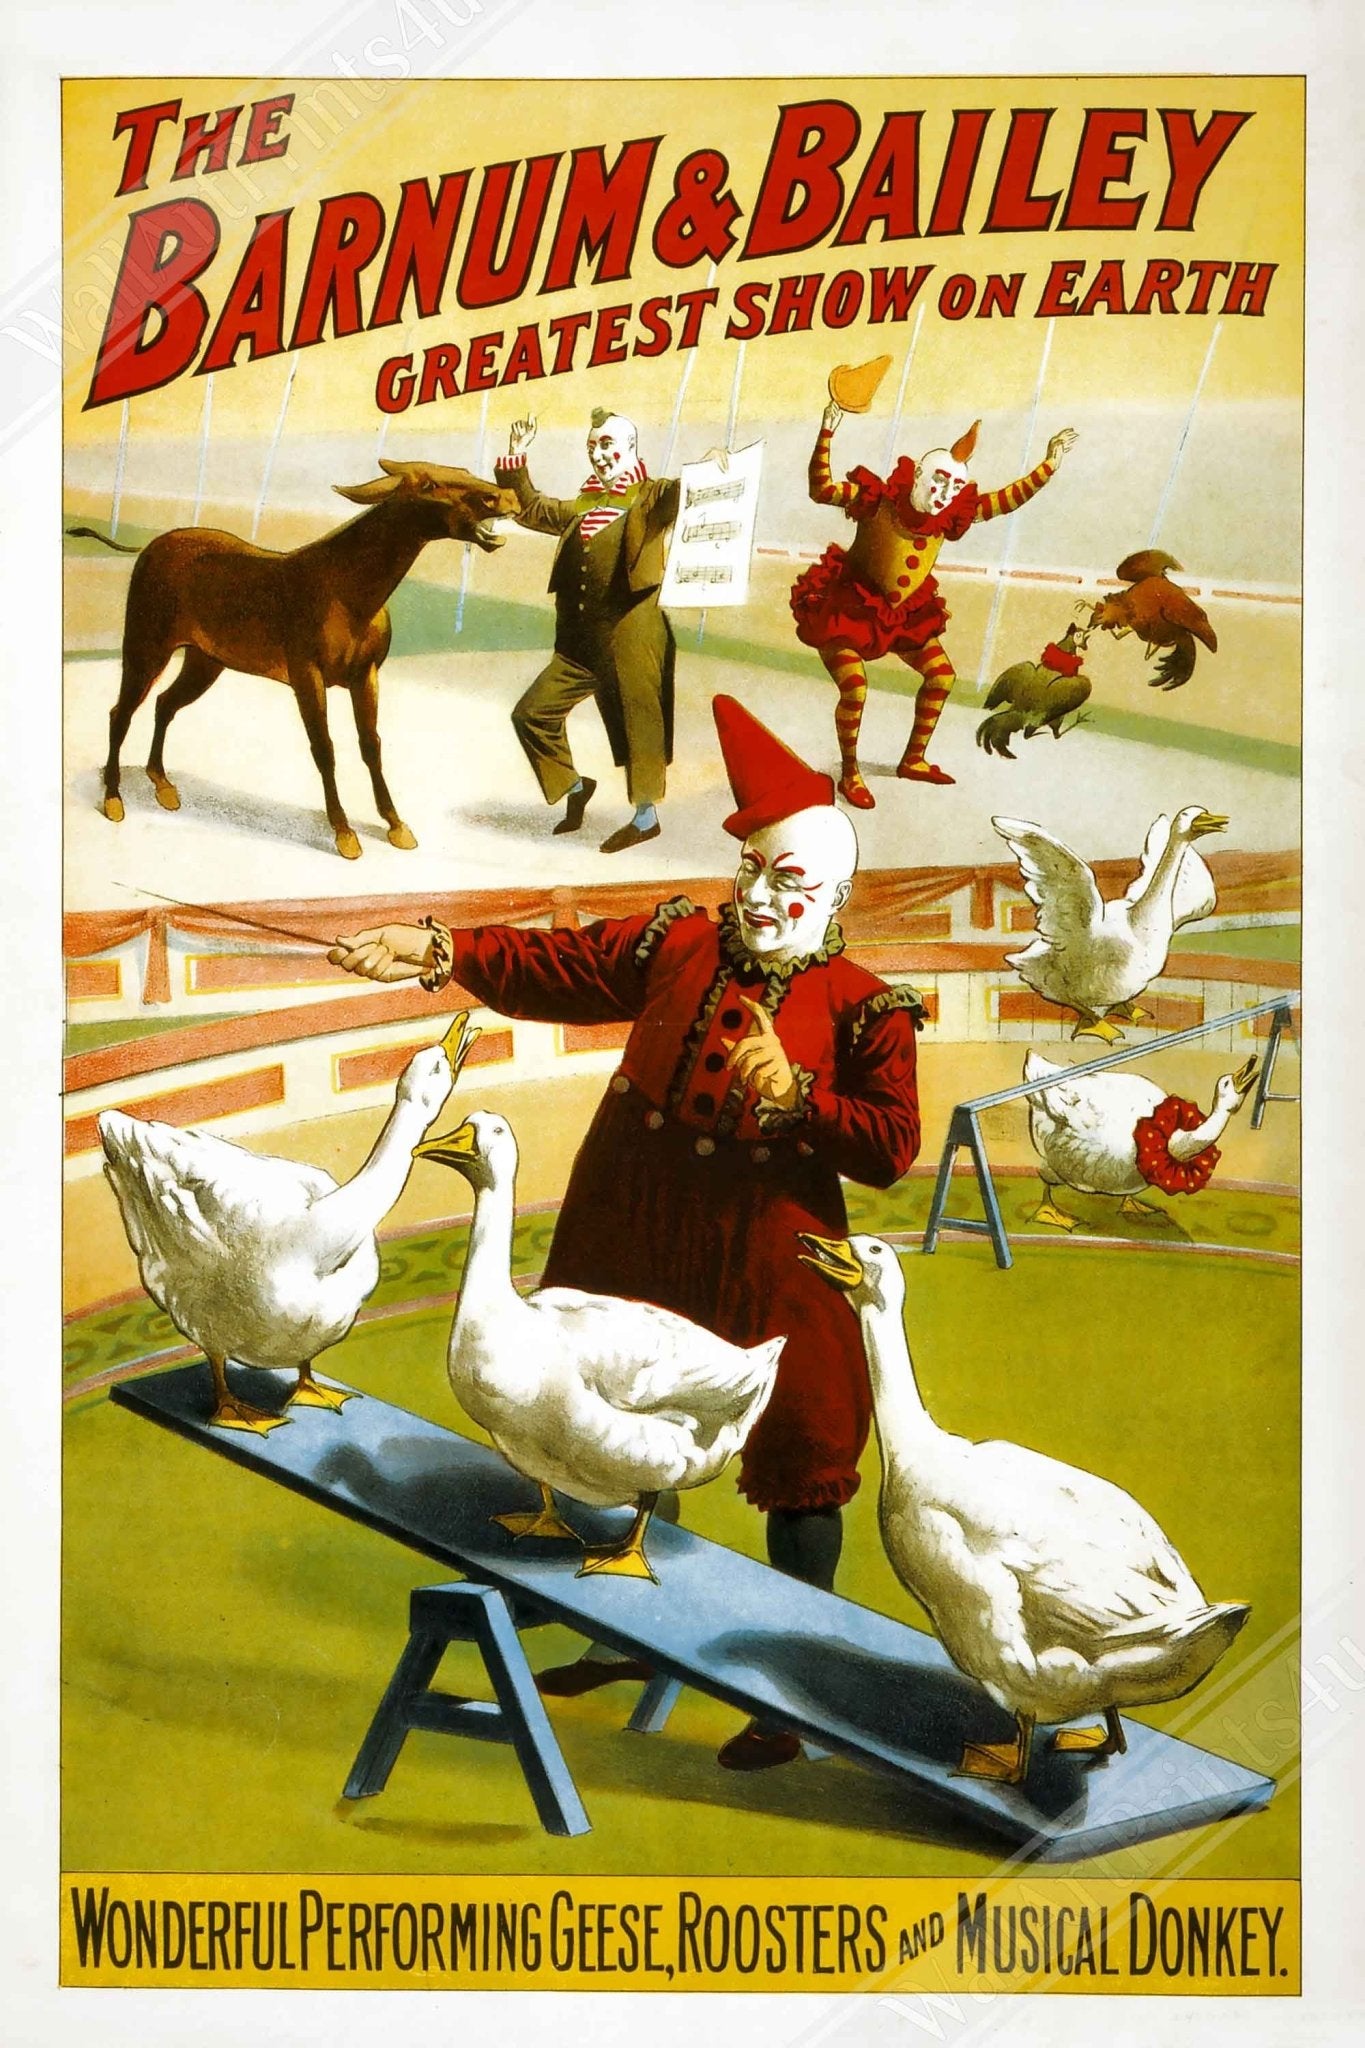 Vintage Circus Poster, Musical Donkey, Performing Geese, Barnum Bailey, Greatest Show On Earth - WallArtPrints4U